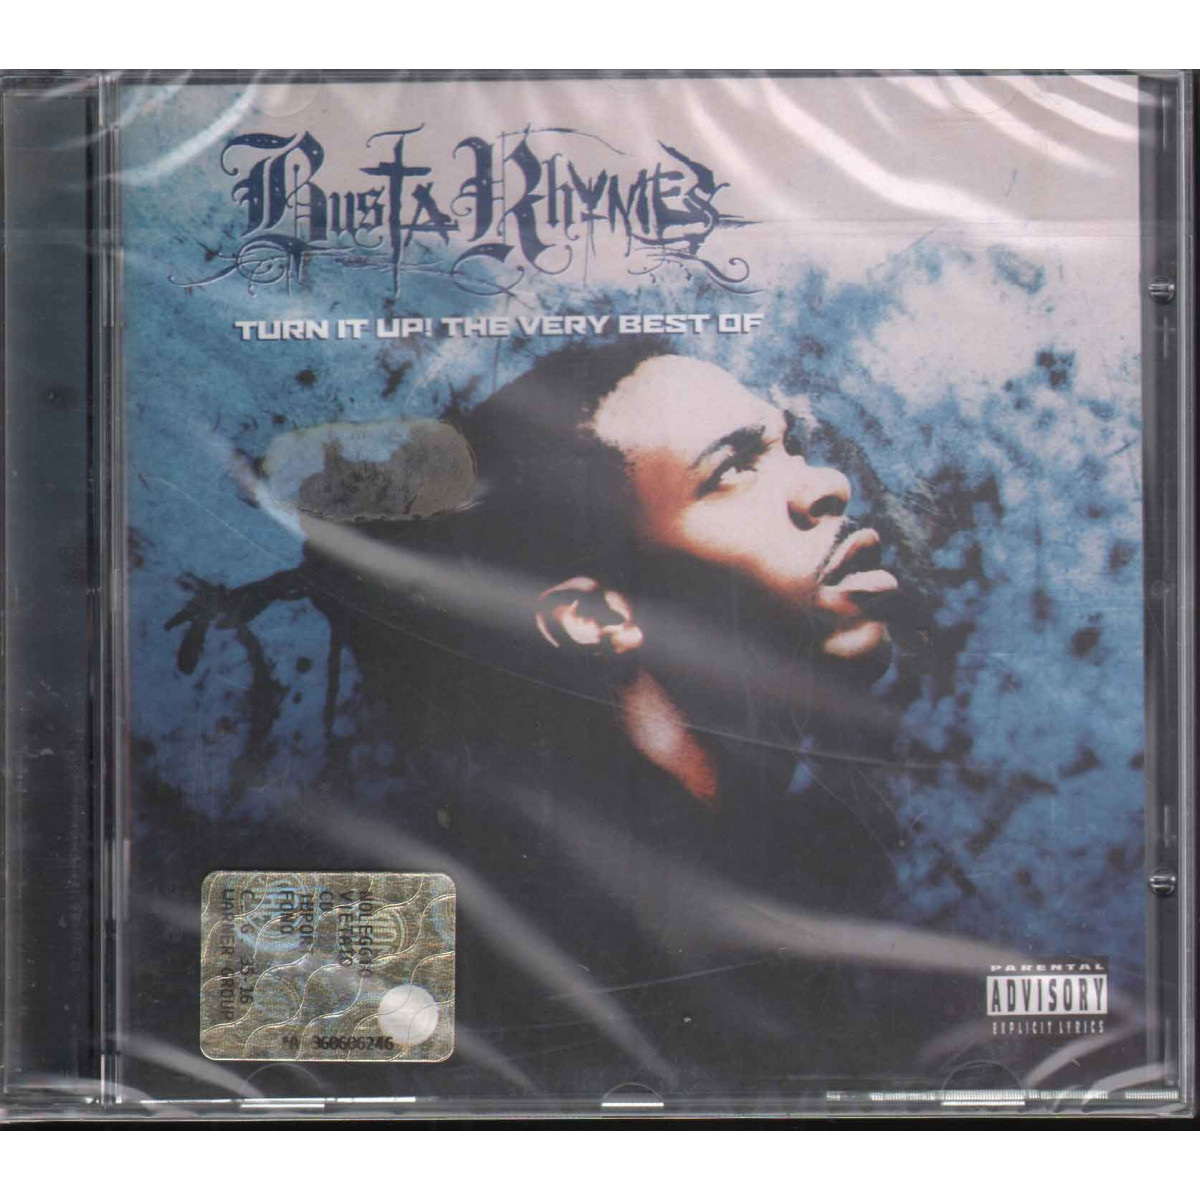 Busta Rhymes ‎CD Turn It Up The Very Best Of / Rhino 8122 73559 2